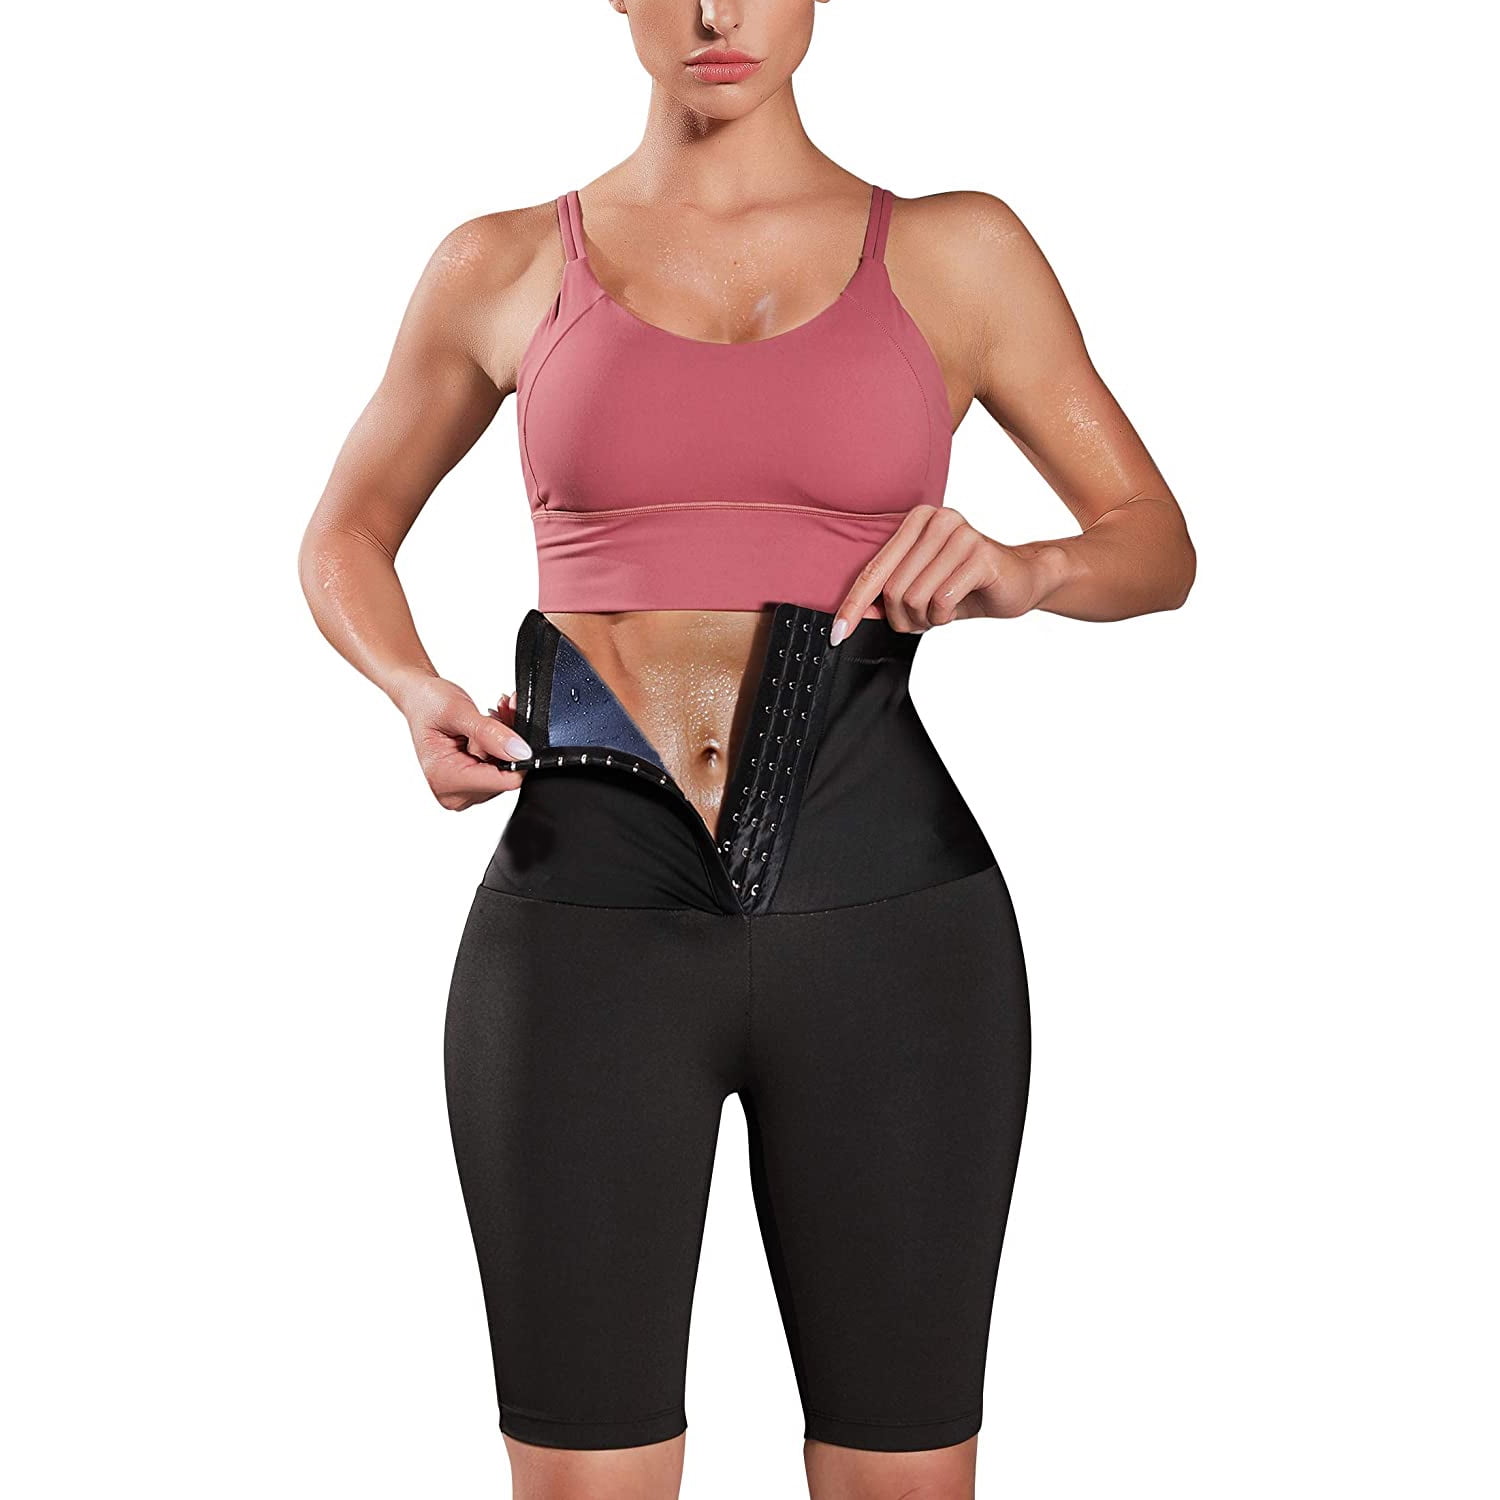 HUIMING Sauna Sweat Shorts for Women High Waisted Thermo Waist Trainer Slimming Leggings Pants Body Shaper 